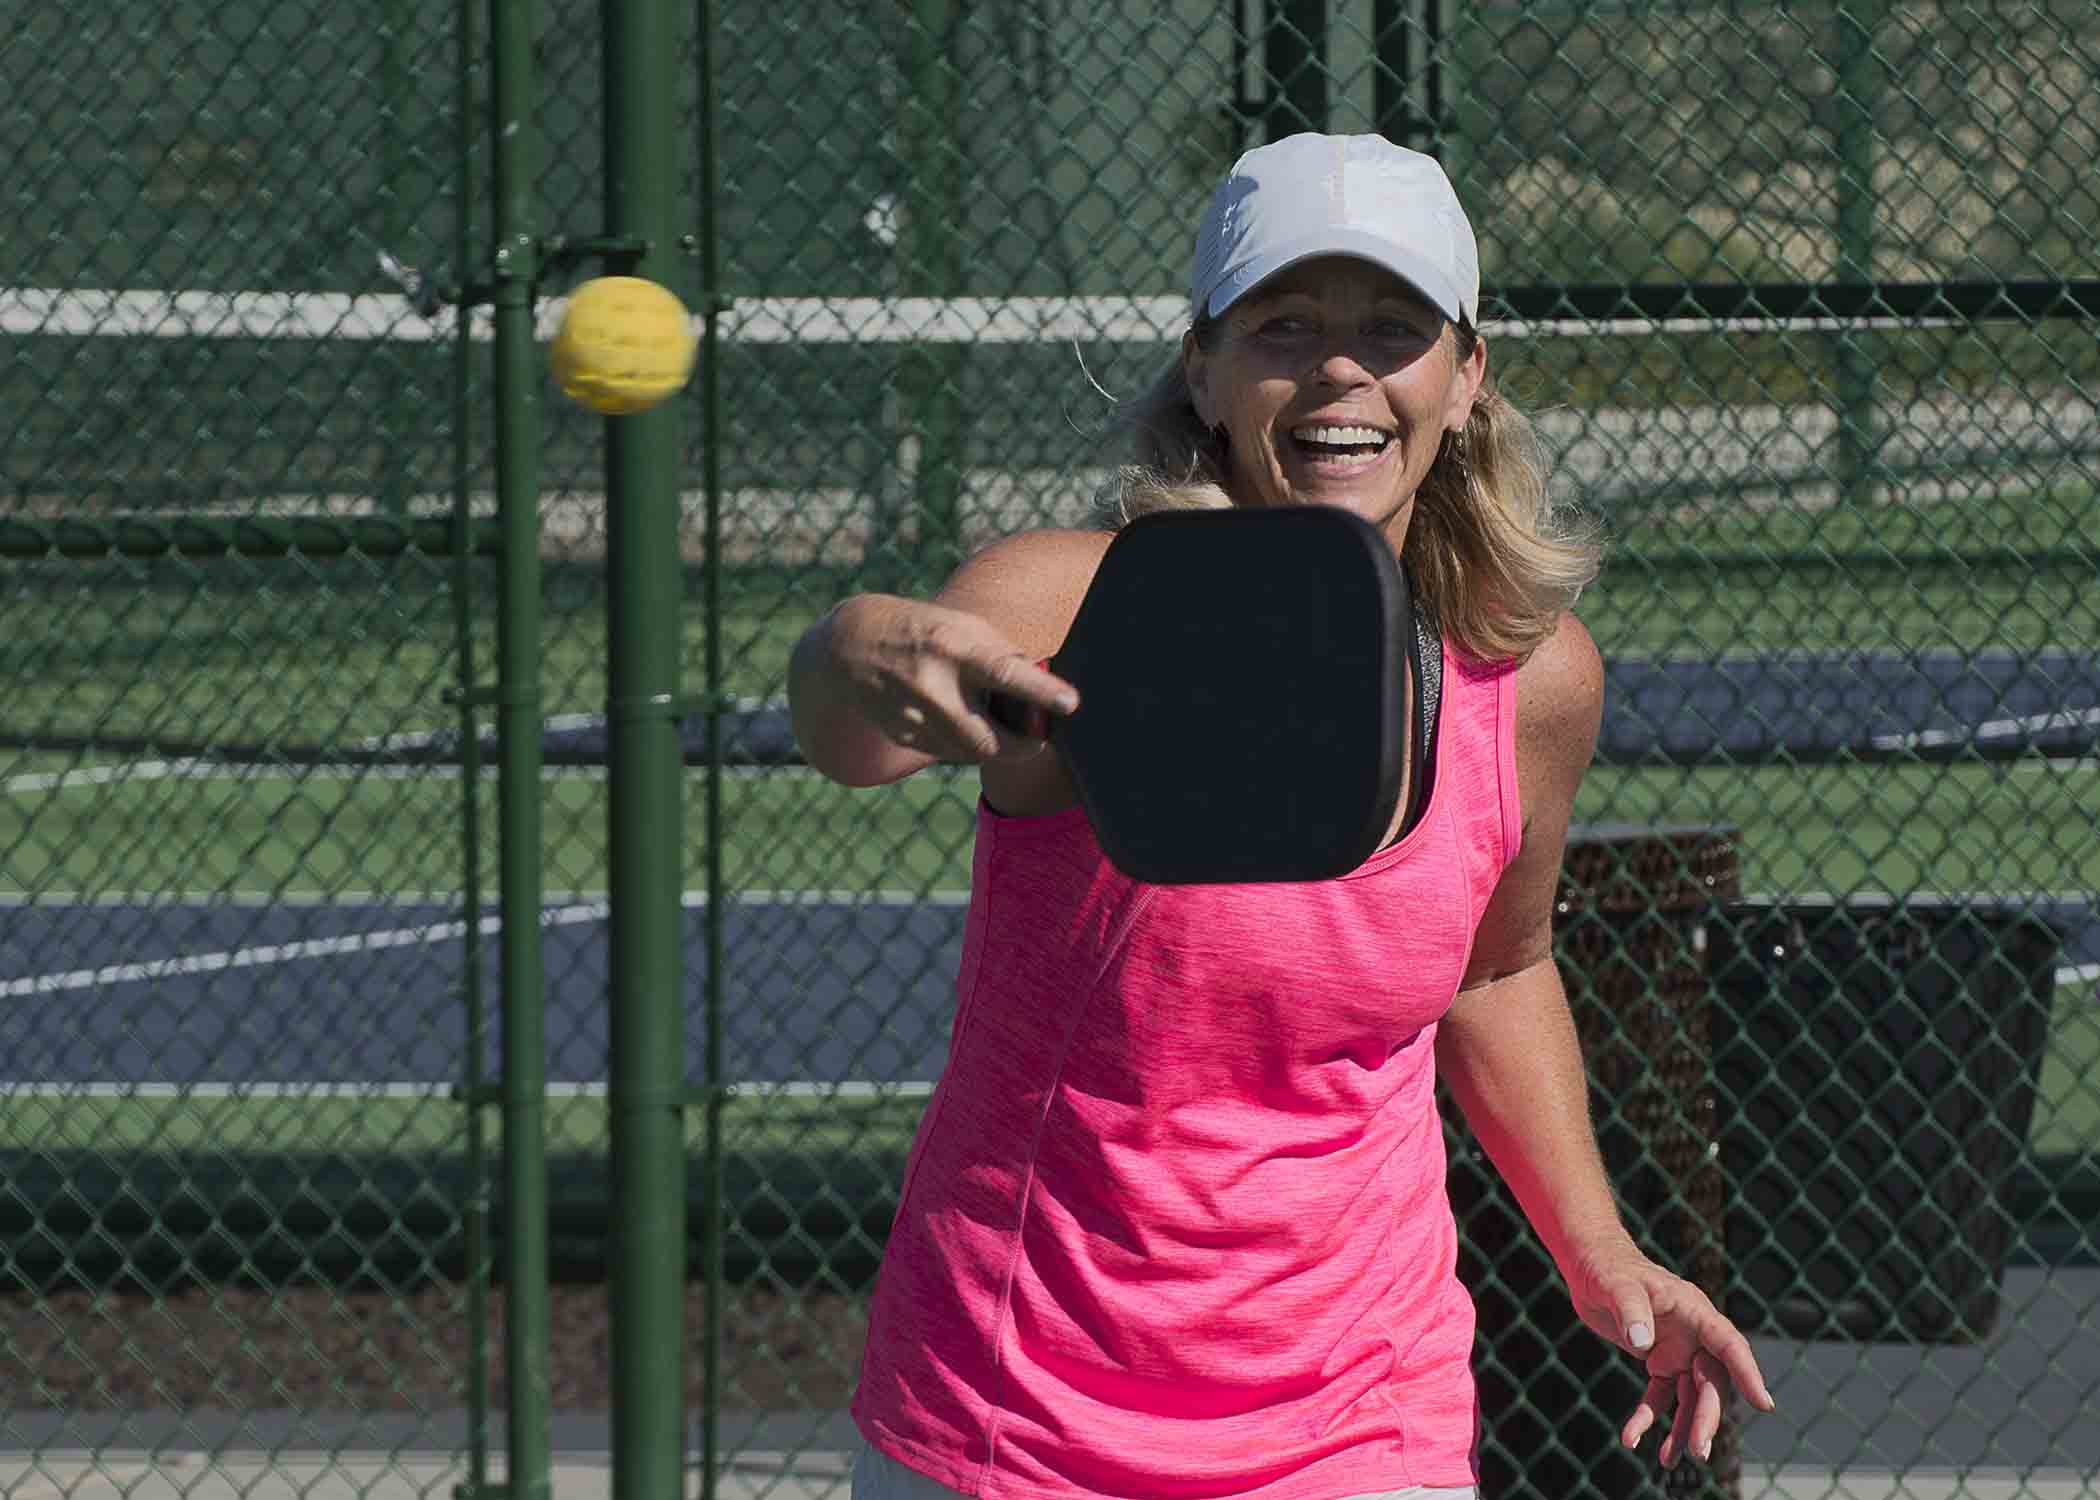 Woman in pink shirt playing pickleball